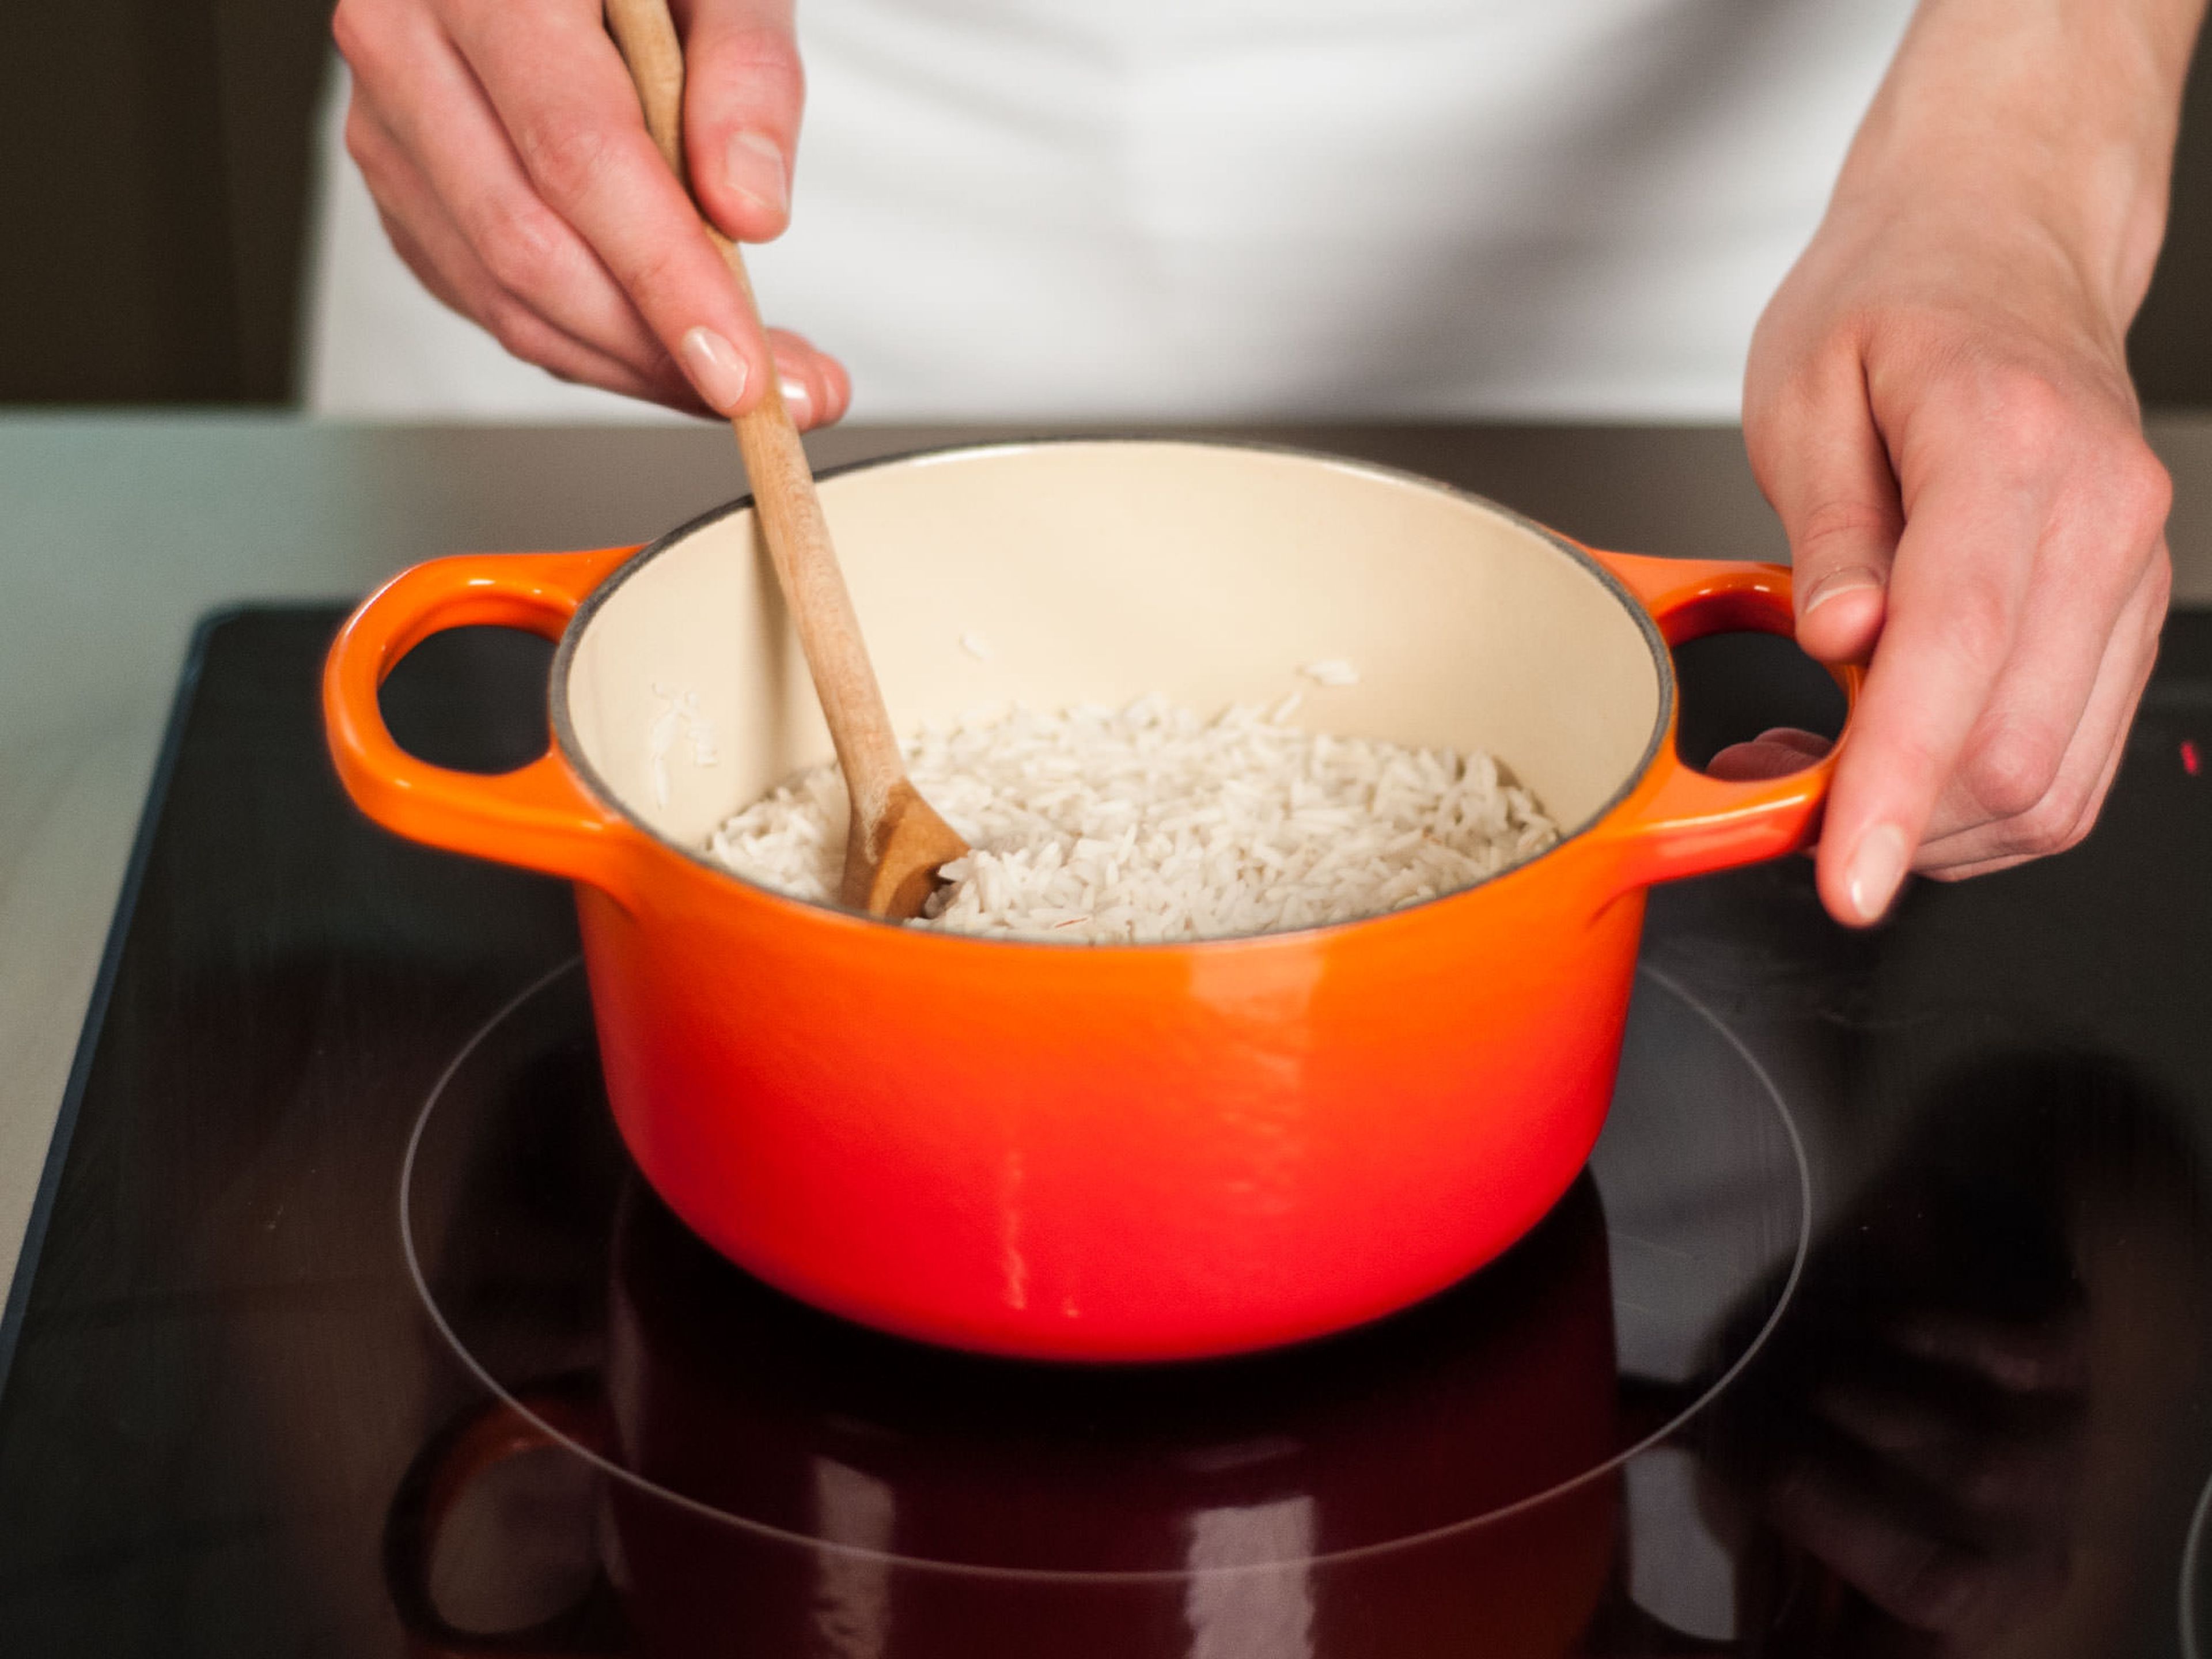 Add rice, water and a pinch of salt to a saucepan. Bring to a simmer, reduce heat and allow to cook for approx. 10 – 15 min. until done.  If necessary, drain excess water.